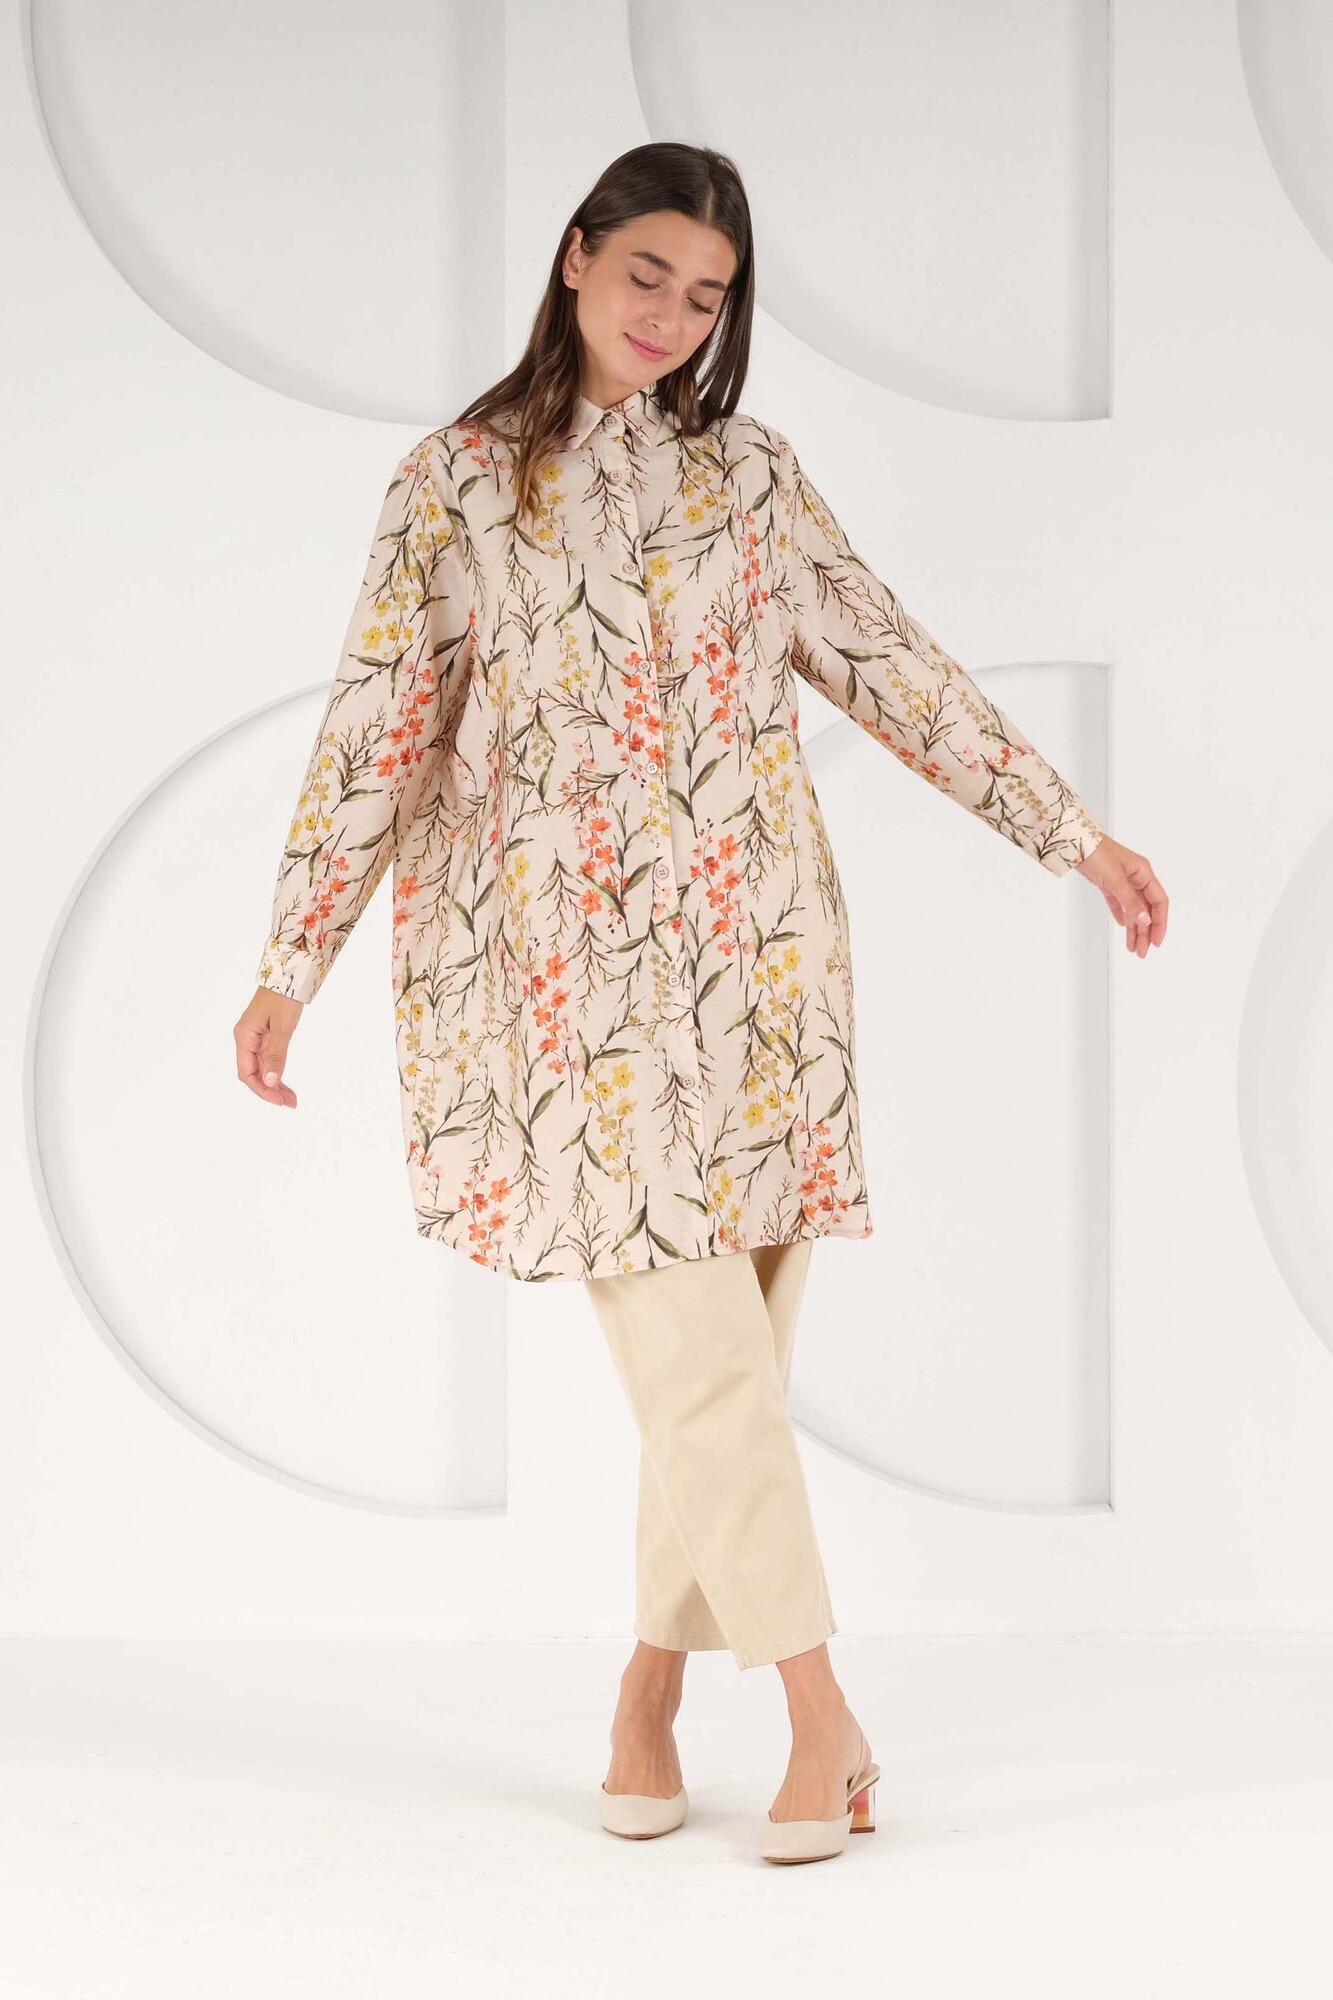 Beige Floral Patterned Tunic